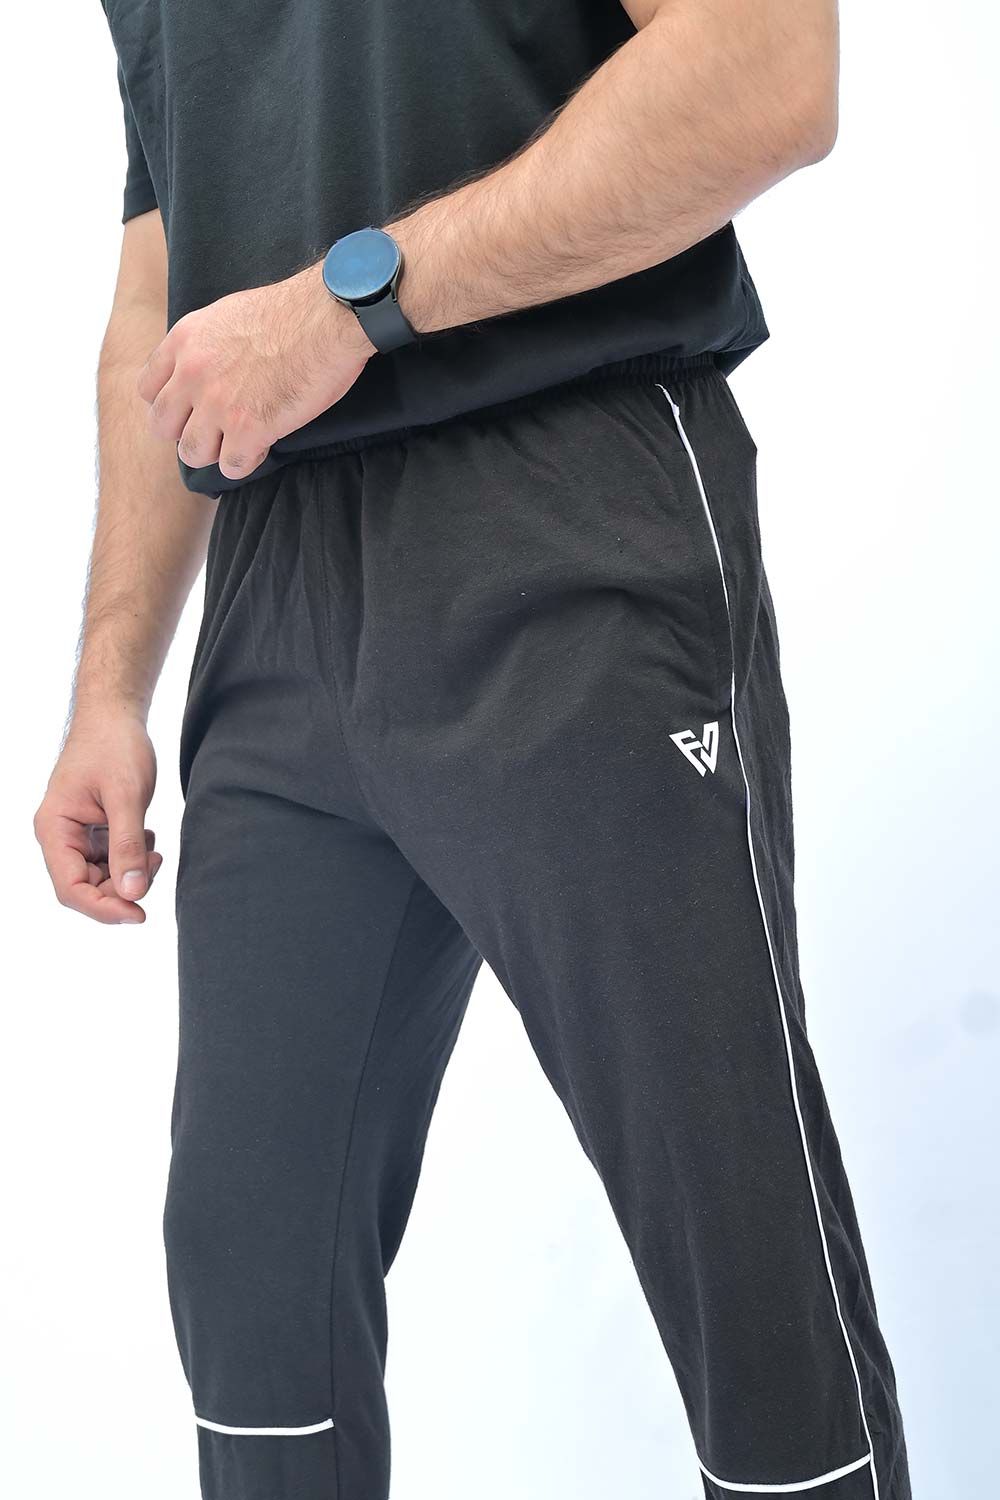 Black Pipping Trouser